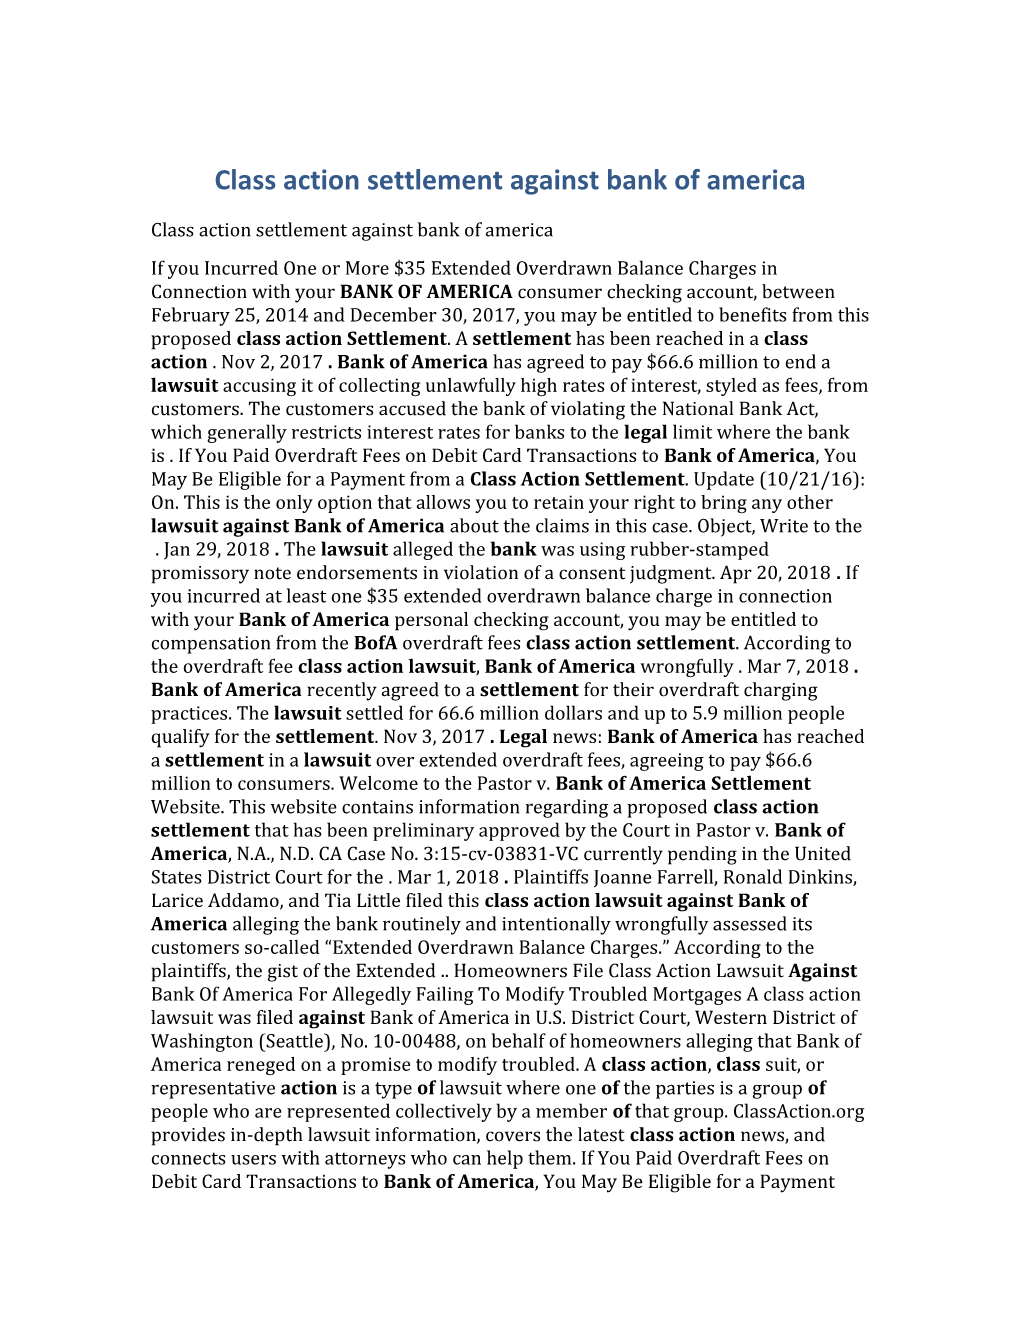 Class Action Settlement Against Bank of America